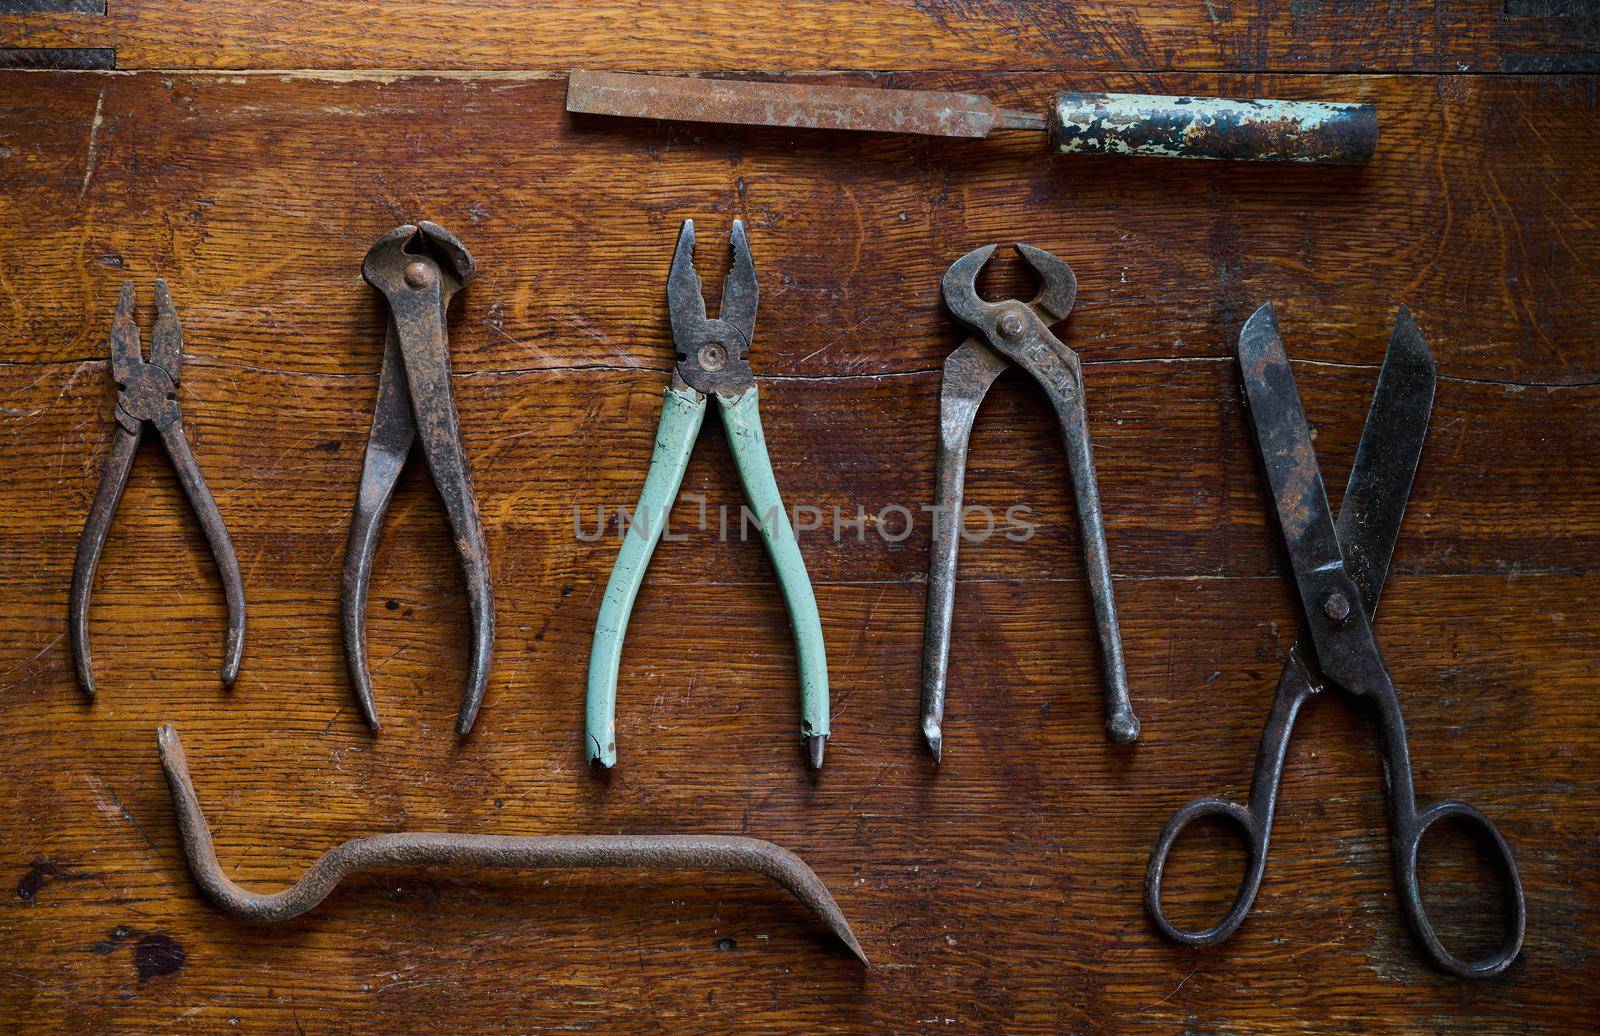 knoling with old and rusty tools on a vintage table made of lacquered wood view from the top